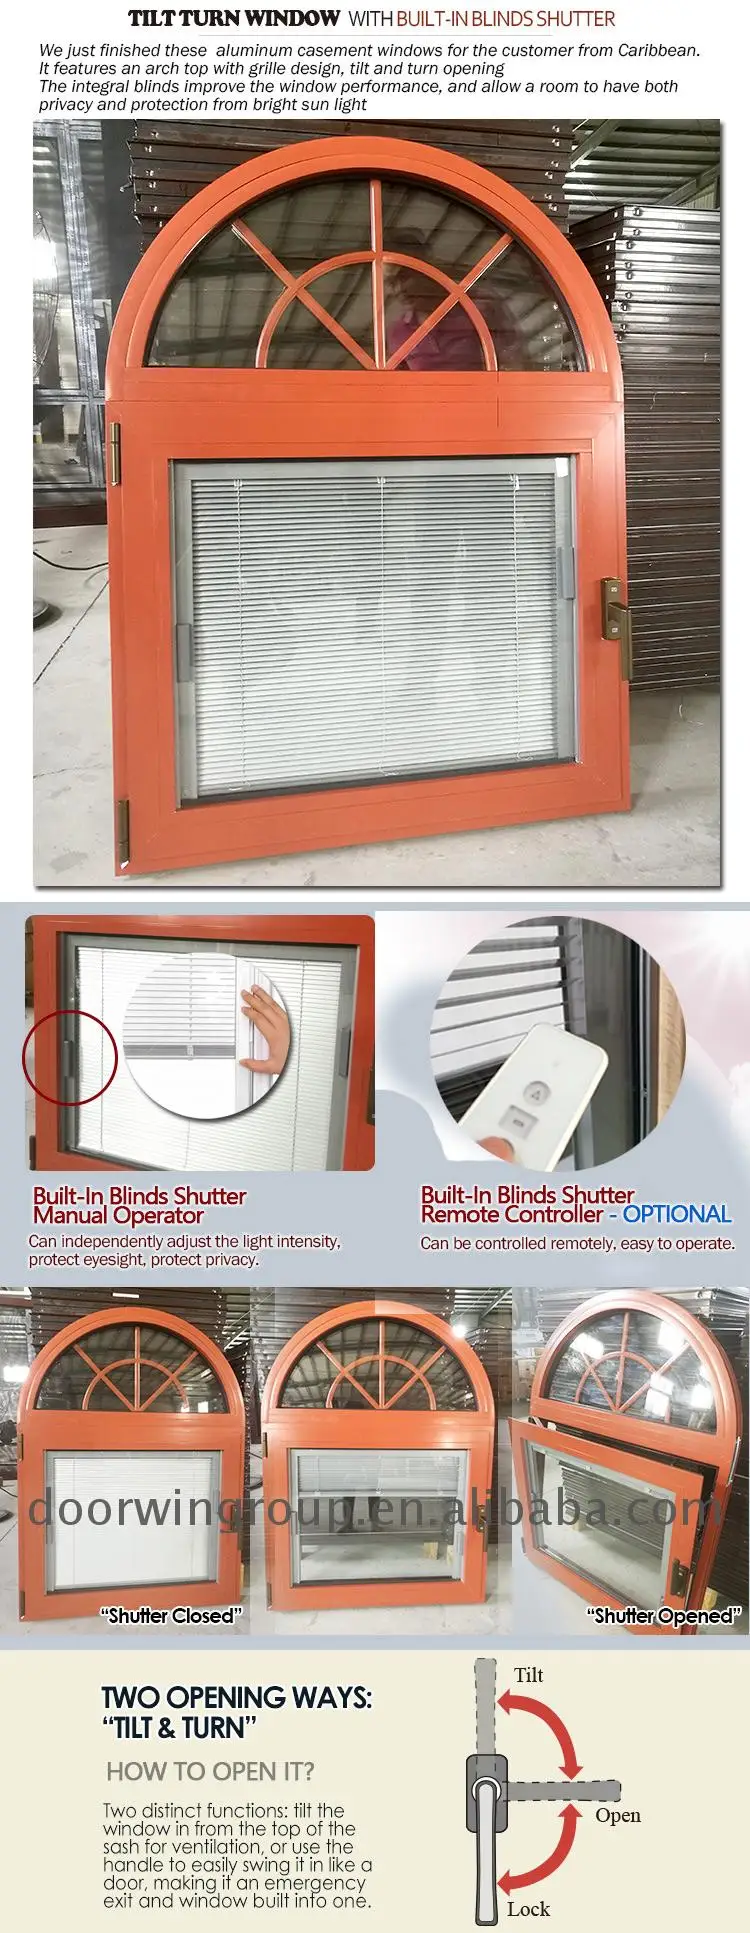 Original factory colored aluminum arched transom window 36 x 36 casement windows with built-in shutter design